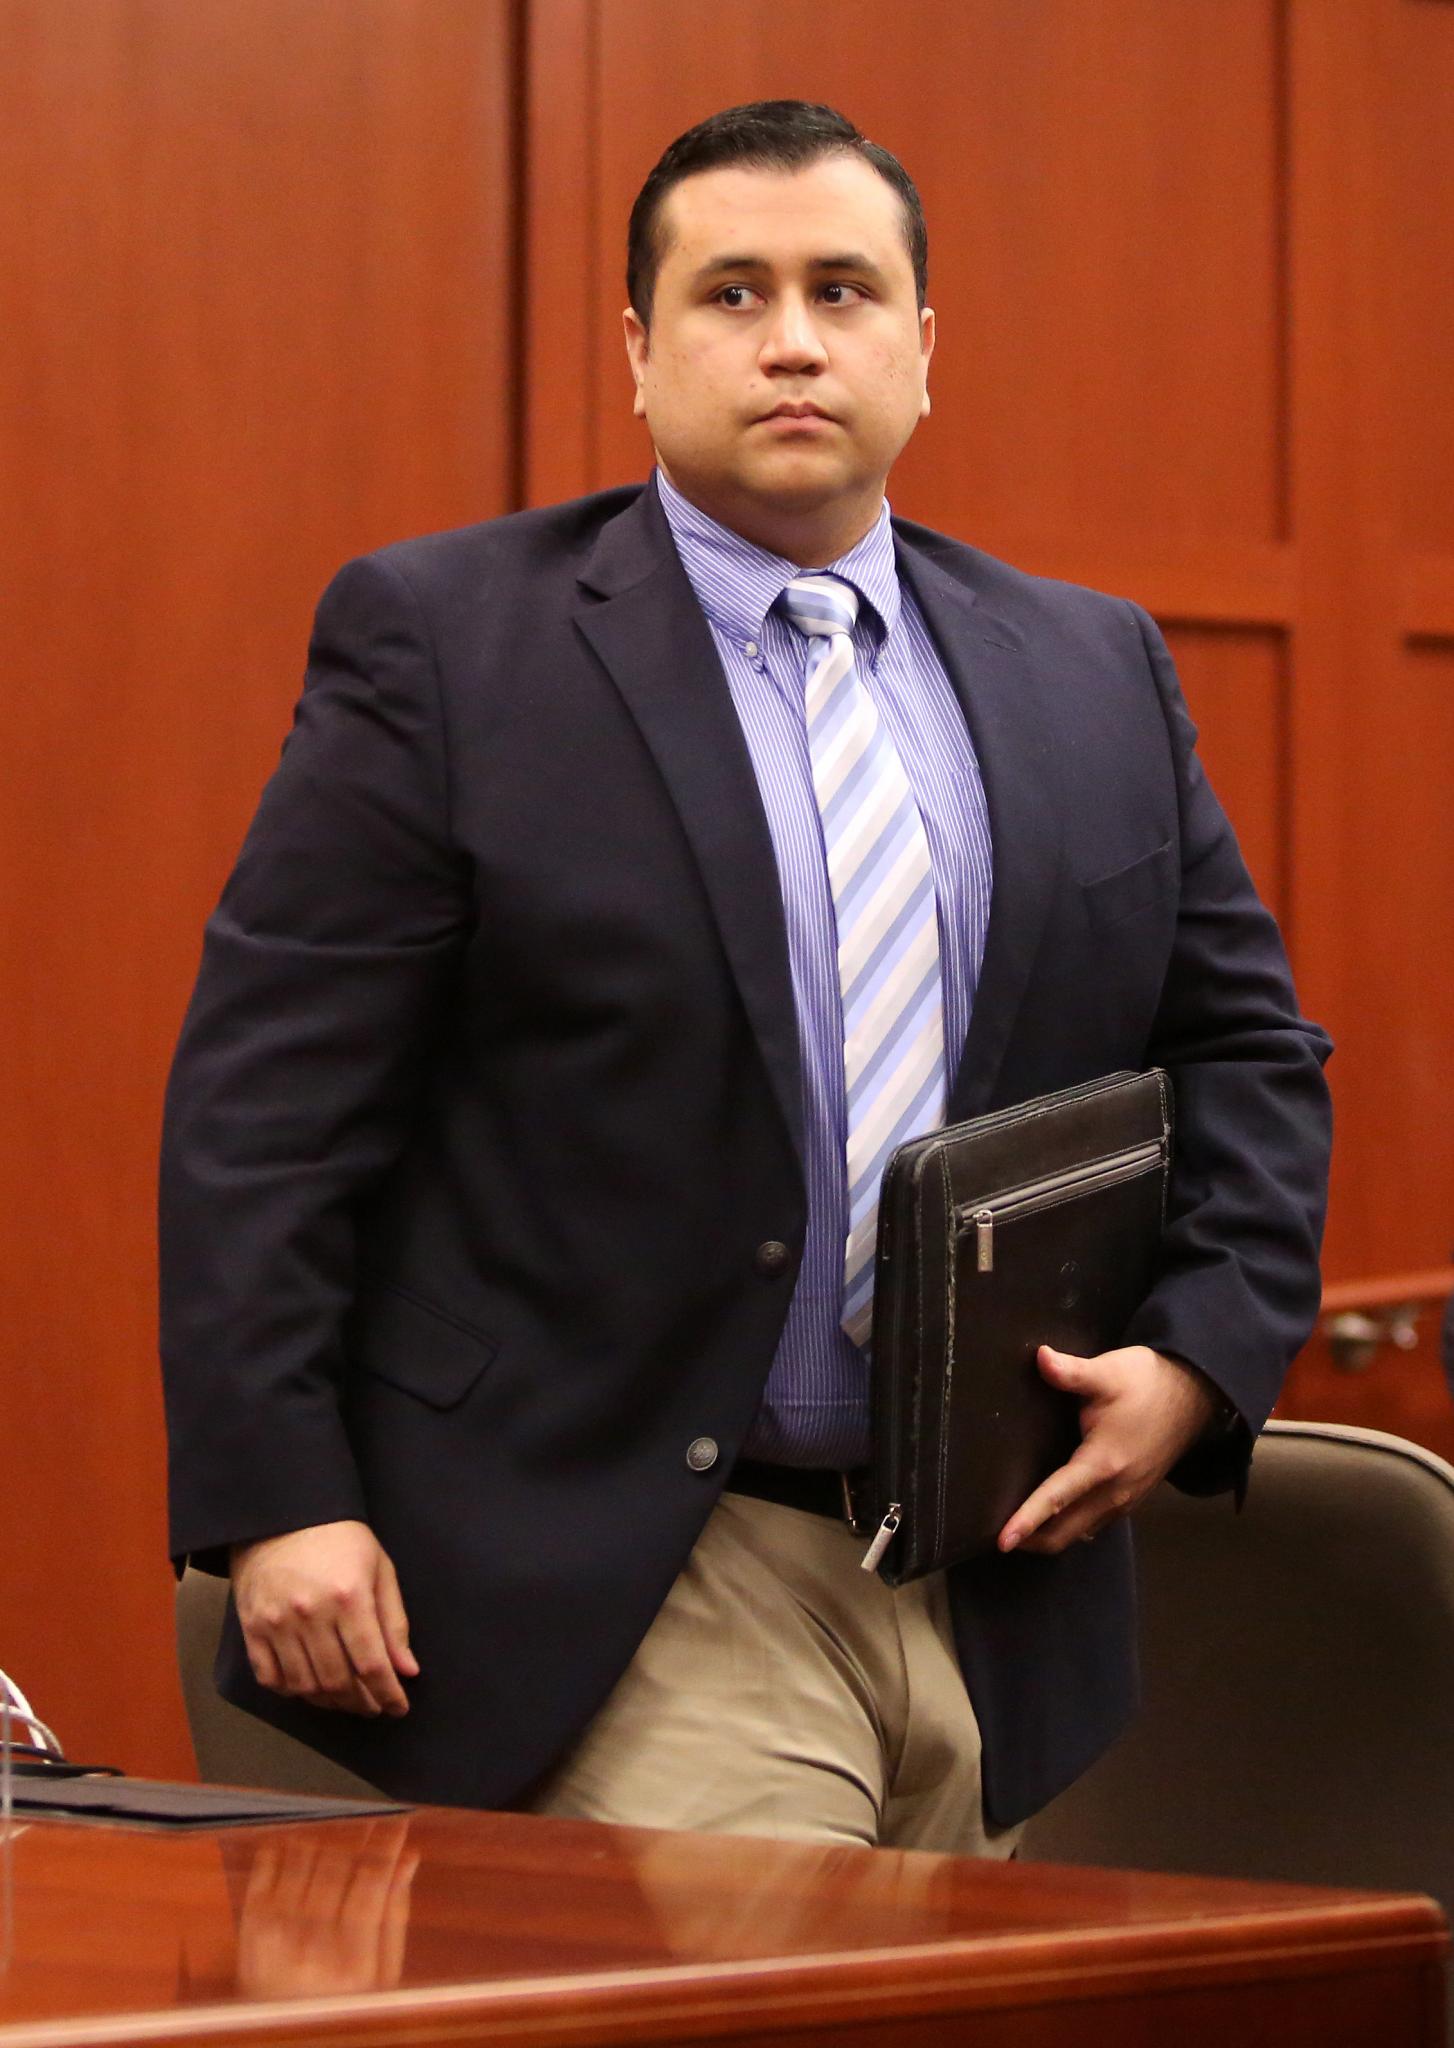 DOJ: George Zimmerman Will Not Face Civil Rights Charges